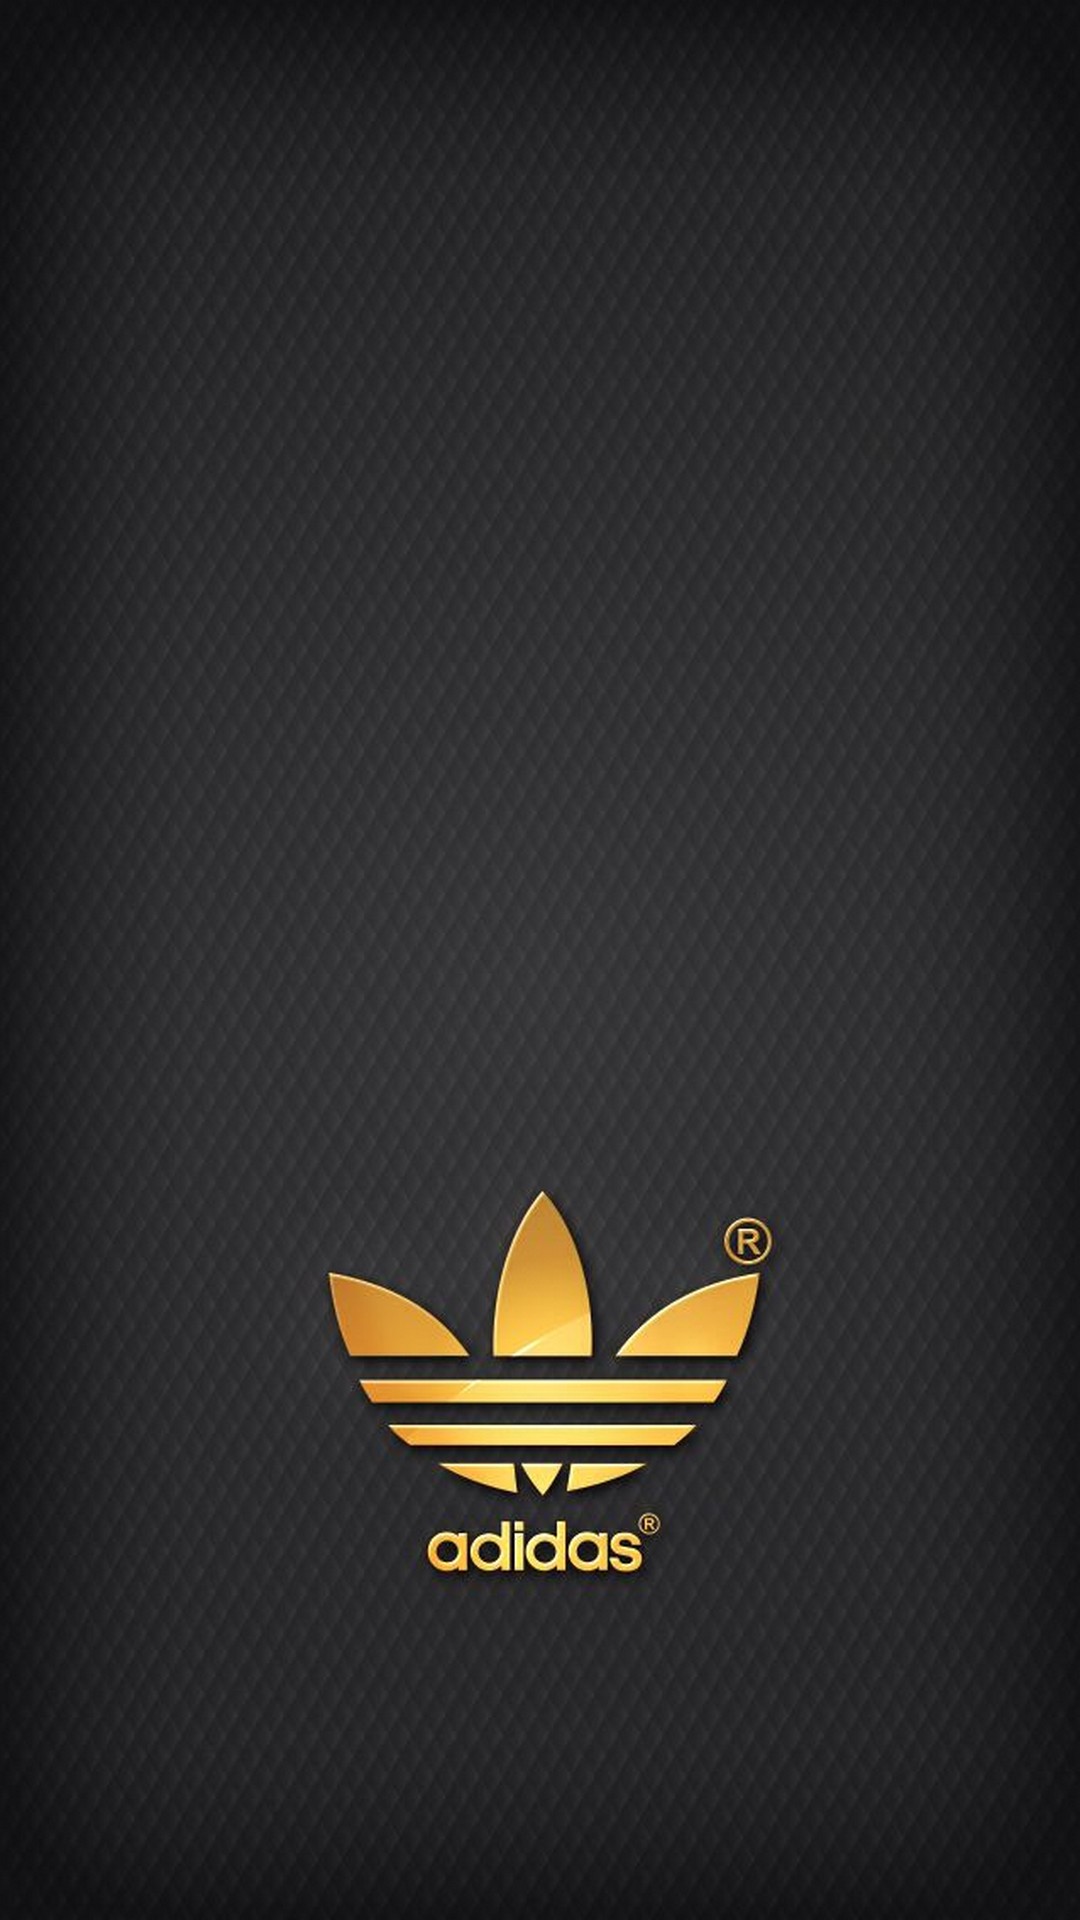 Adidas Logo iPhone 6 Wallpaper HD with high-resolution 1080x1920 pixel. Download all Mobile Wallpapers and Use them as wallpapers for your iPhone, Tablet, iPad, Android and other mobile devices